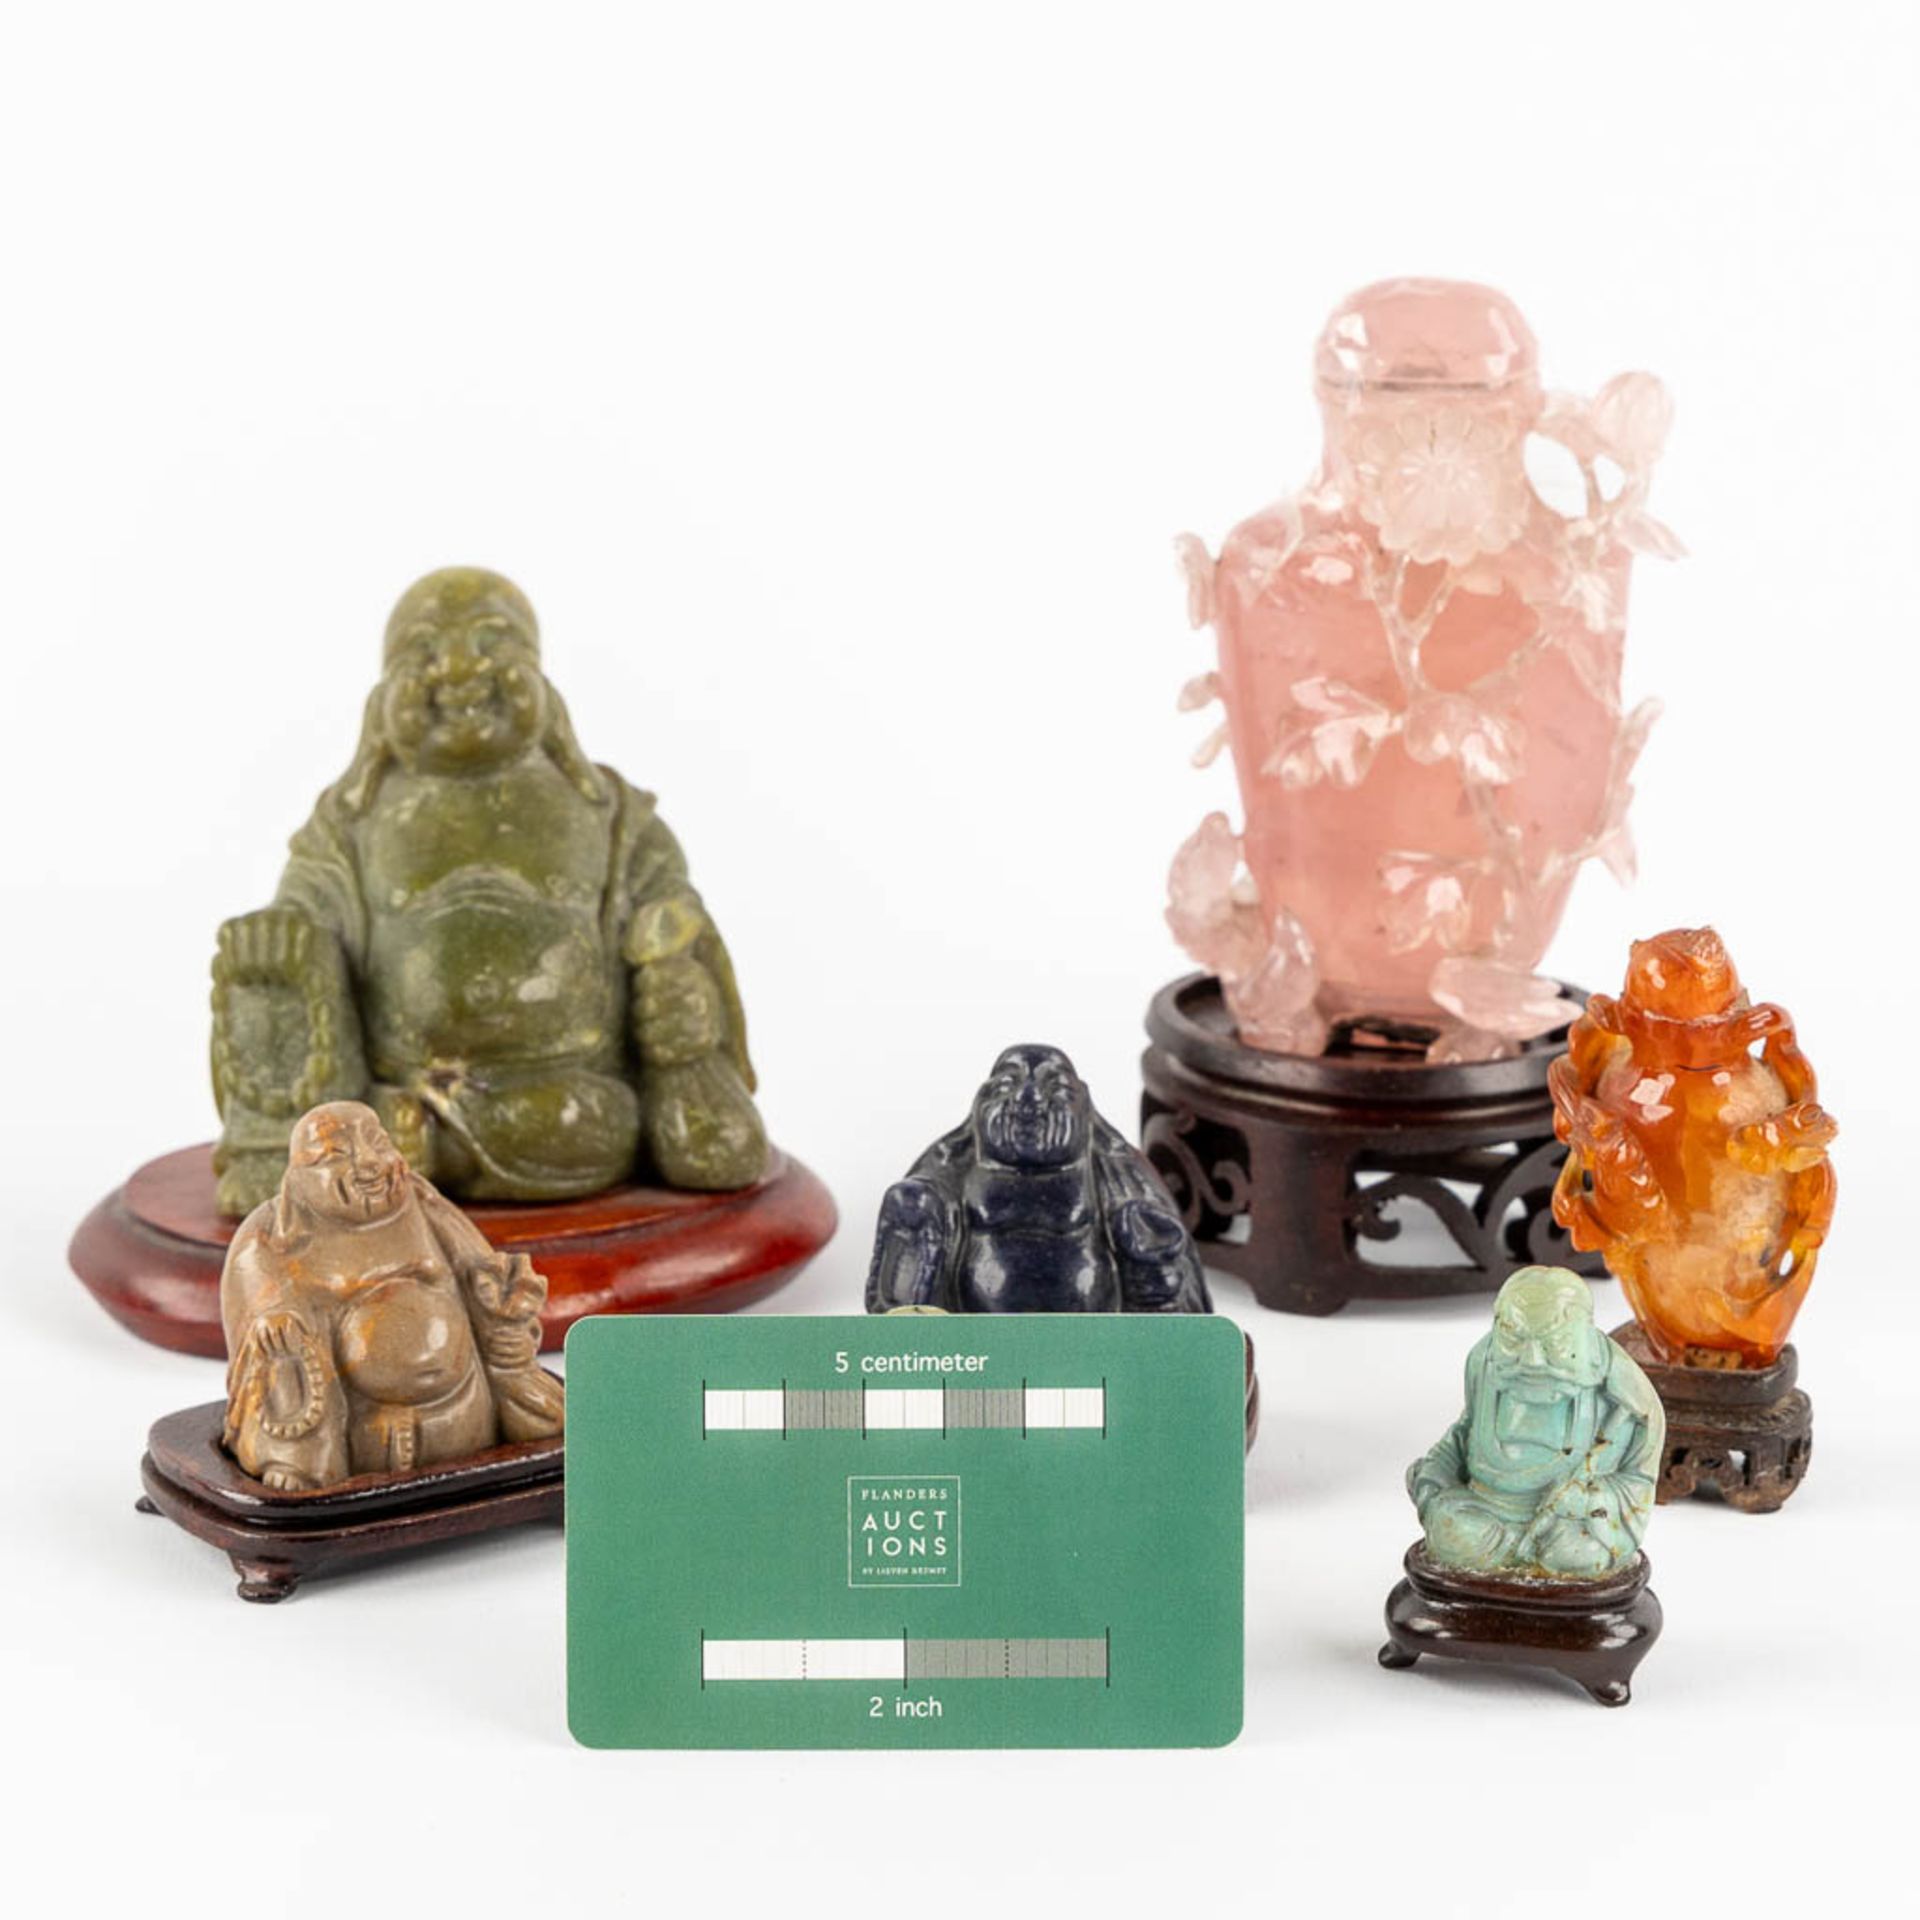 Six Buddha and a snuff bottle, Sculptured hardstones or jade. China. (L:6 x W:8 x H:11,5 cm) - Image 2 of 16